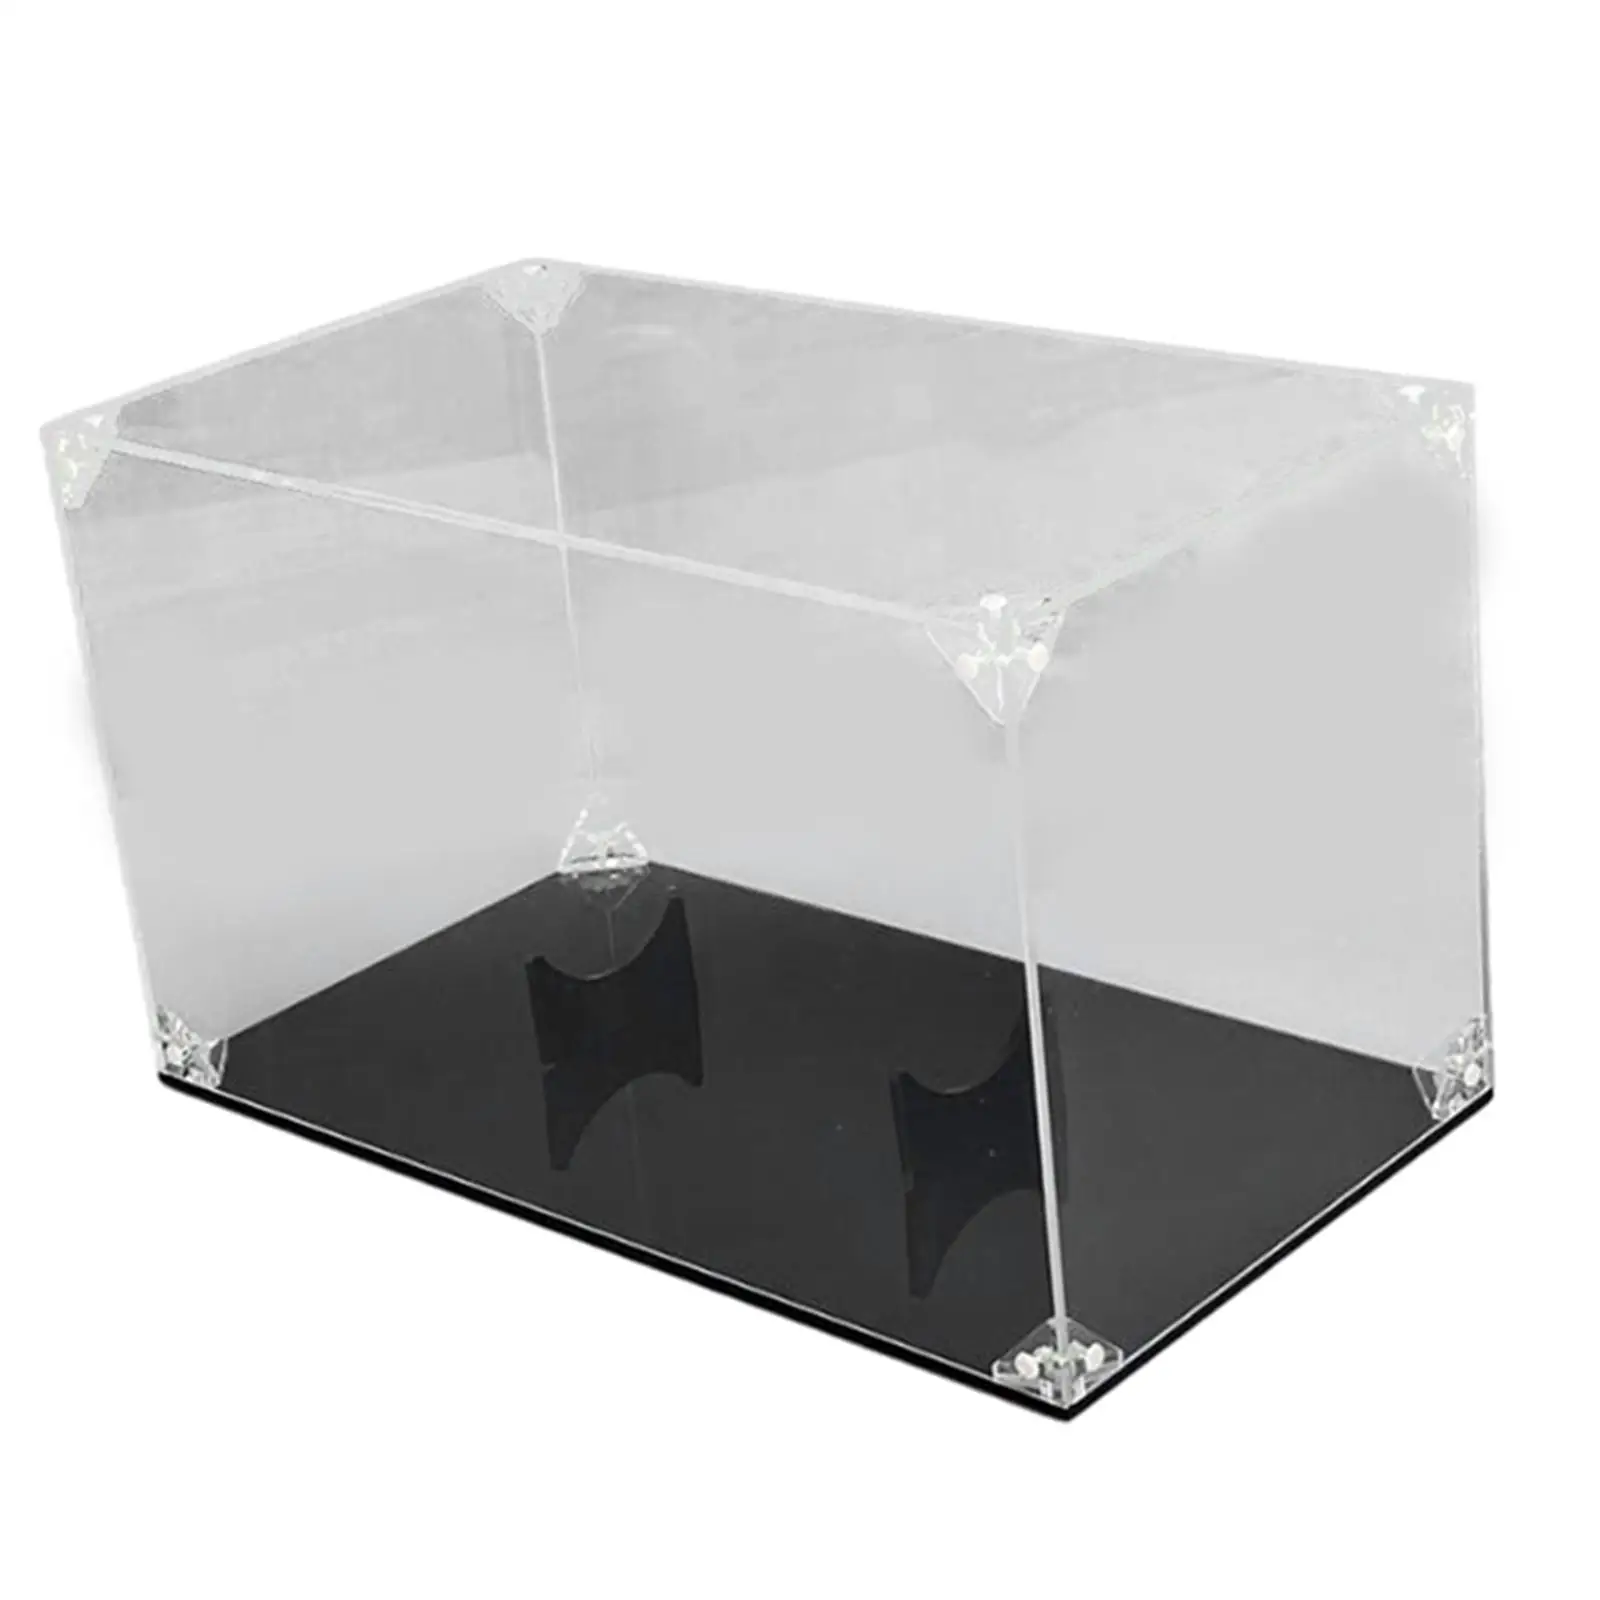 Clear Acrylic Football Display Case Oval Ball Holder Rugby Holder Sports Collectibles Storage Showcase Box Football Storage Rack